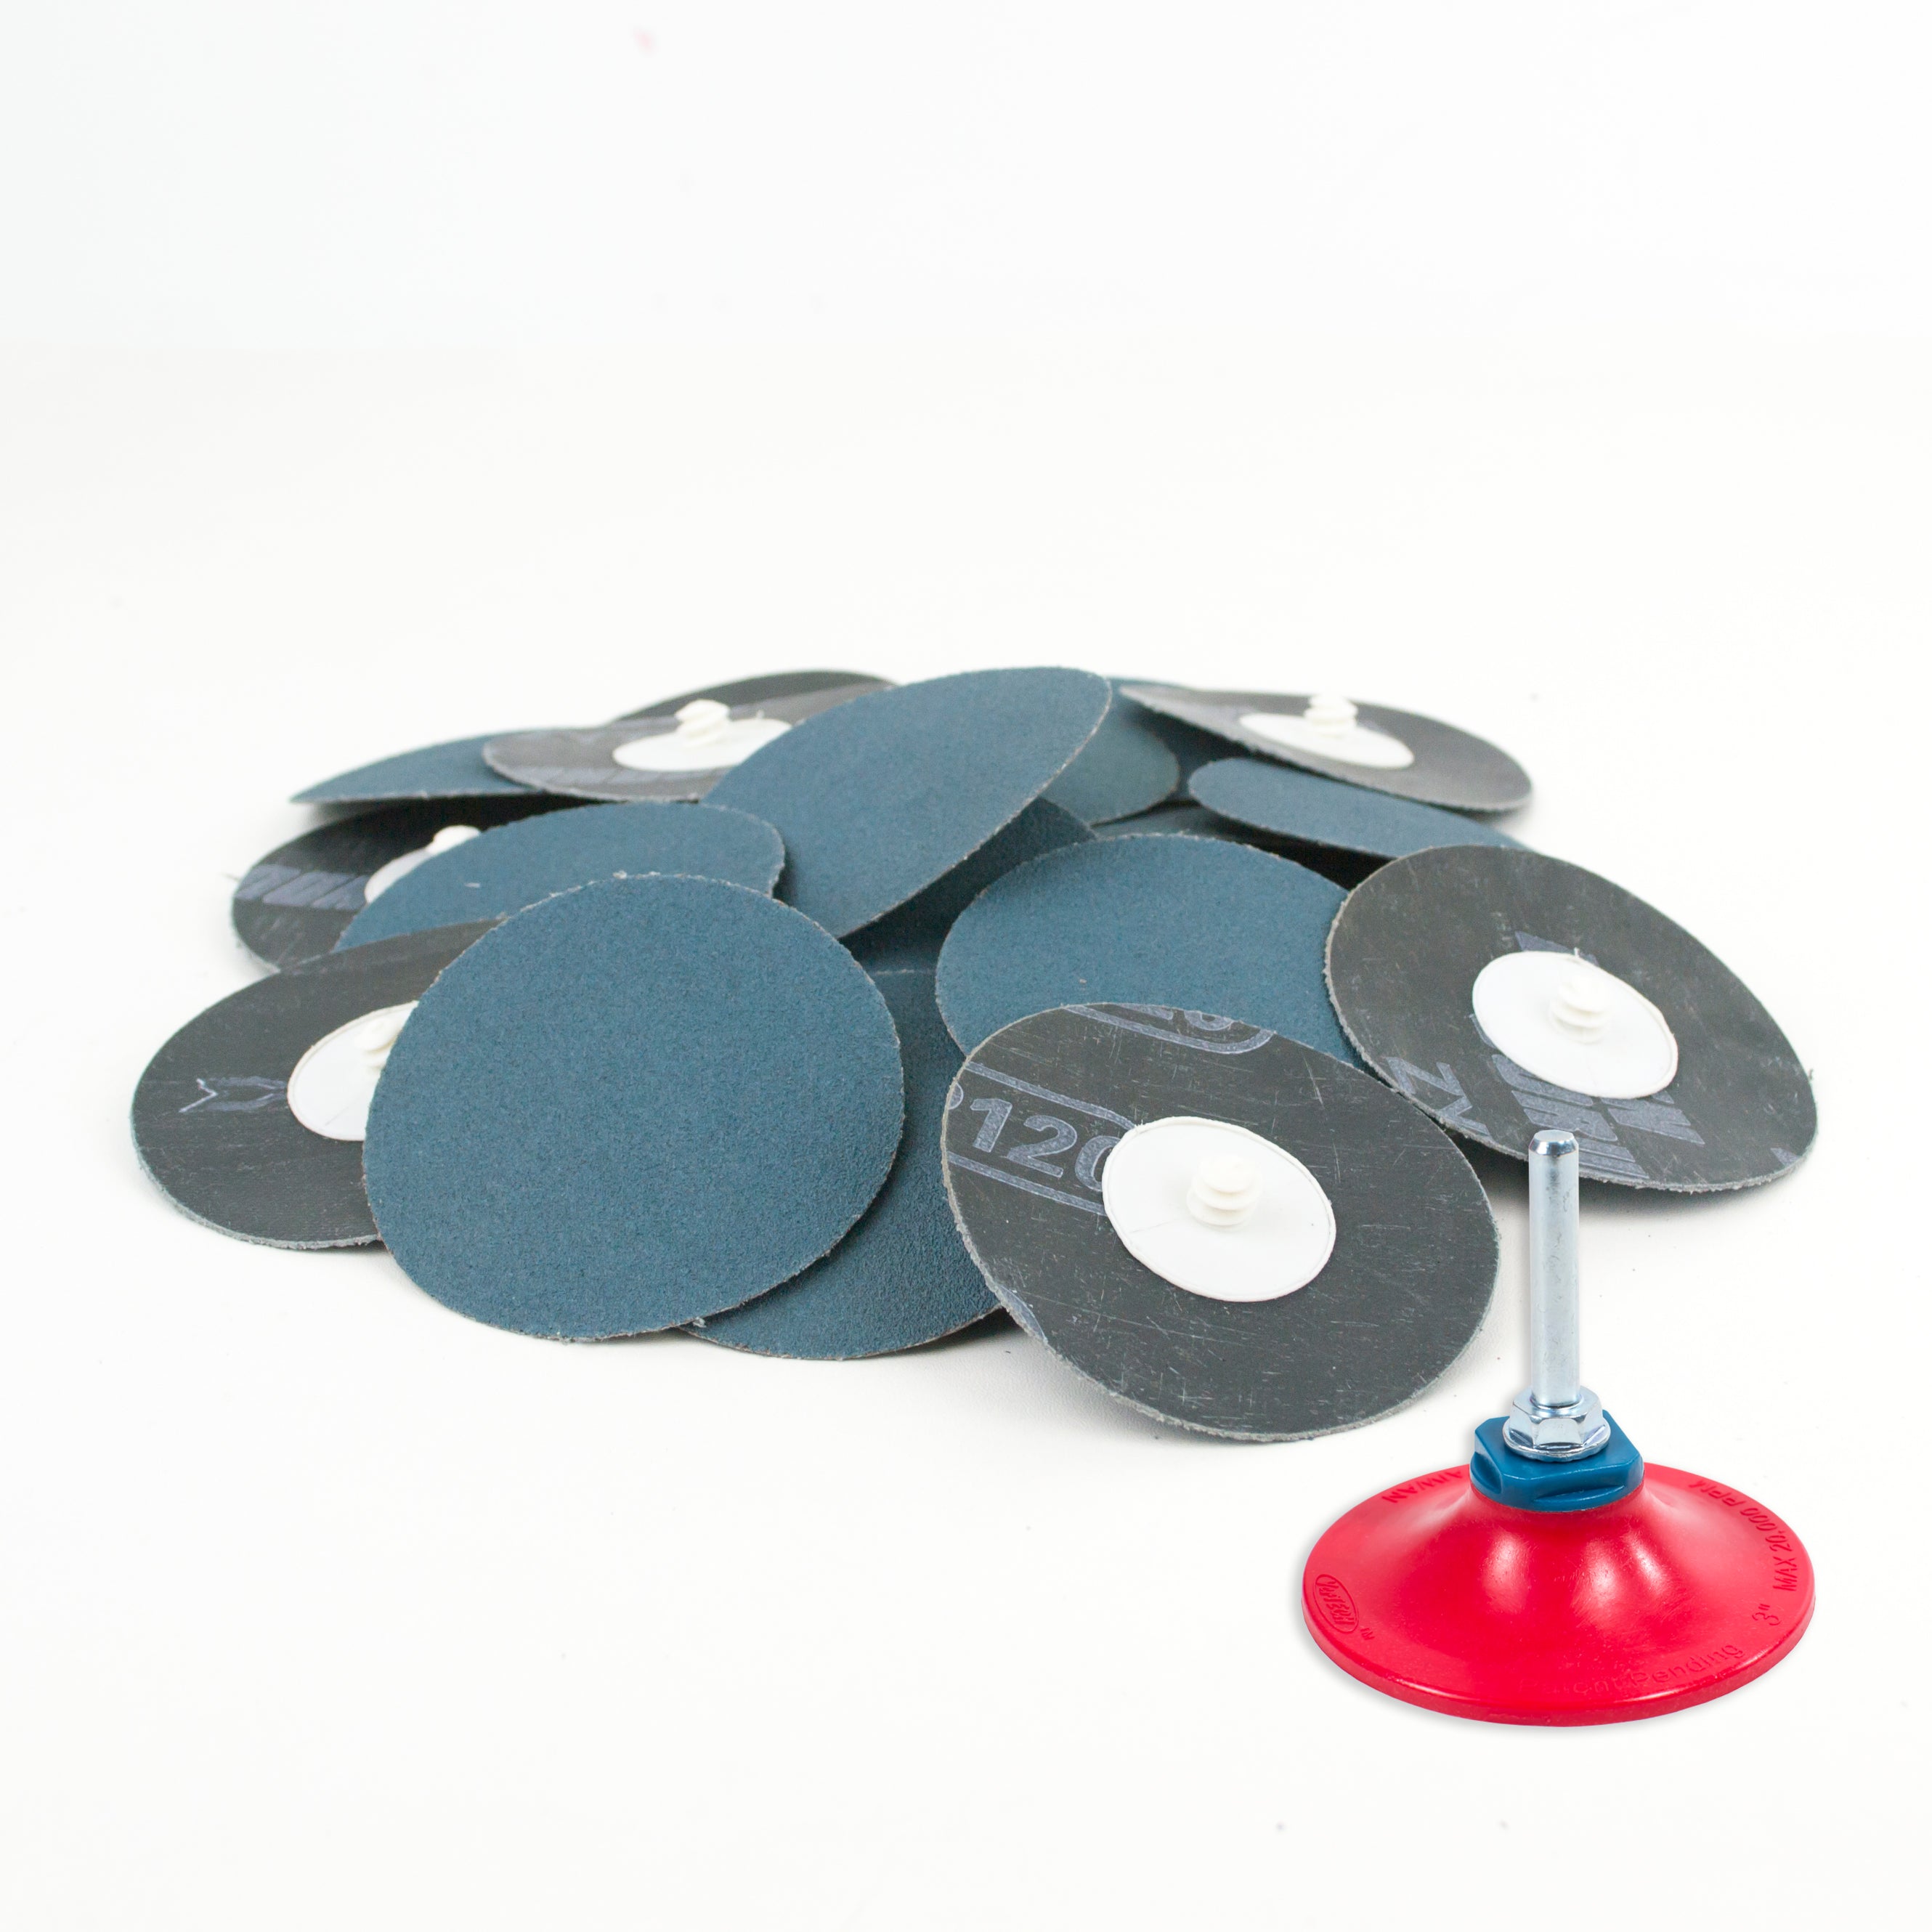 3 inch 120 Grit Zirconia “Roloc” Roll-On Type Abrasive Sanding Discs (25 pcs) with Holder